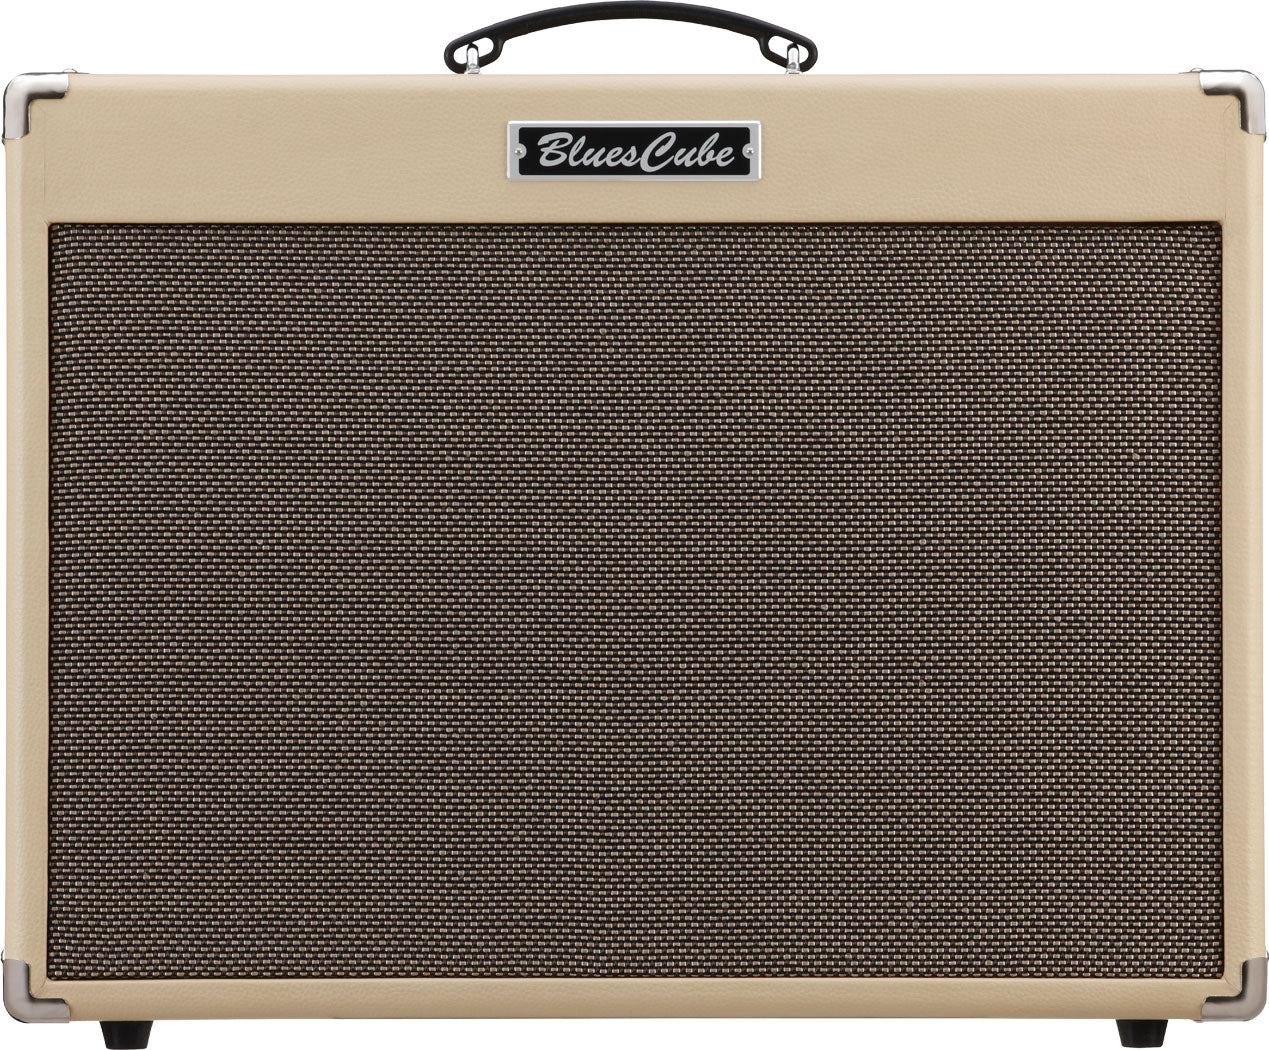 Roland Blues Cube Stage 60W 1x12 Guitar Combo Amplifier (BC STAGE), ROLAND, GUITAR AMPLIFIER, roland-guitar-amplifier-bcstage, ZOSO MUSIC SDN BHD